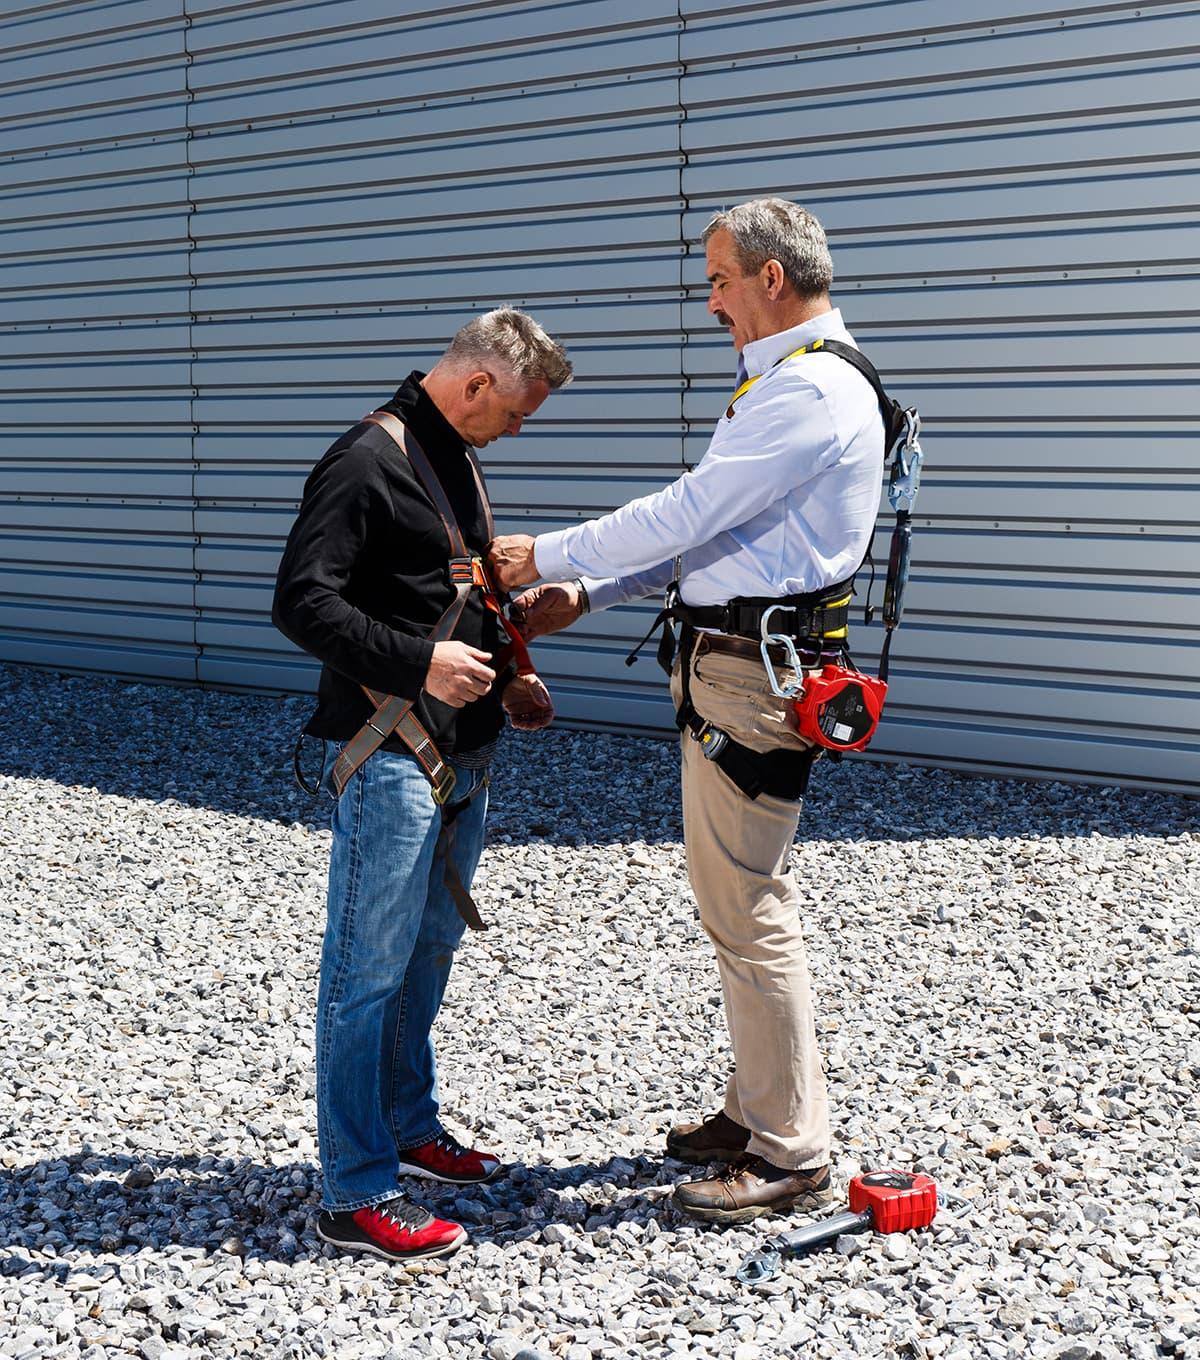 Two men wearing safety harness. One man is helping to adjust the other man's harness.